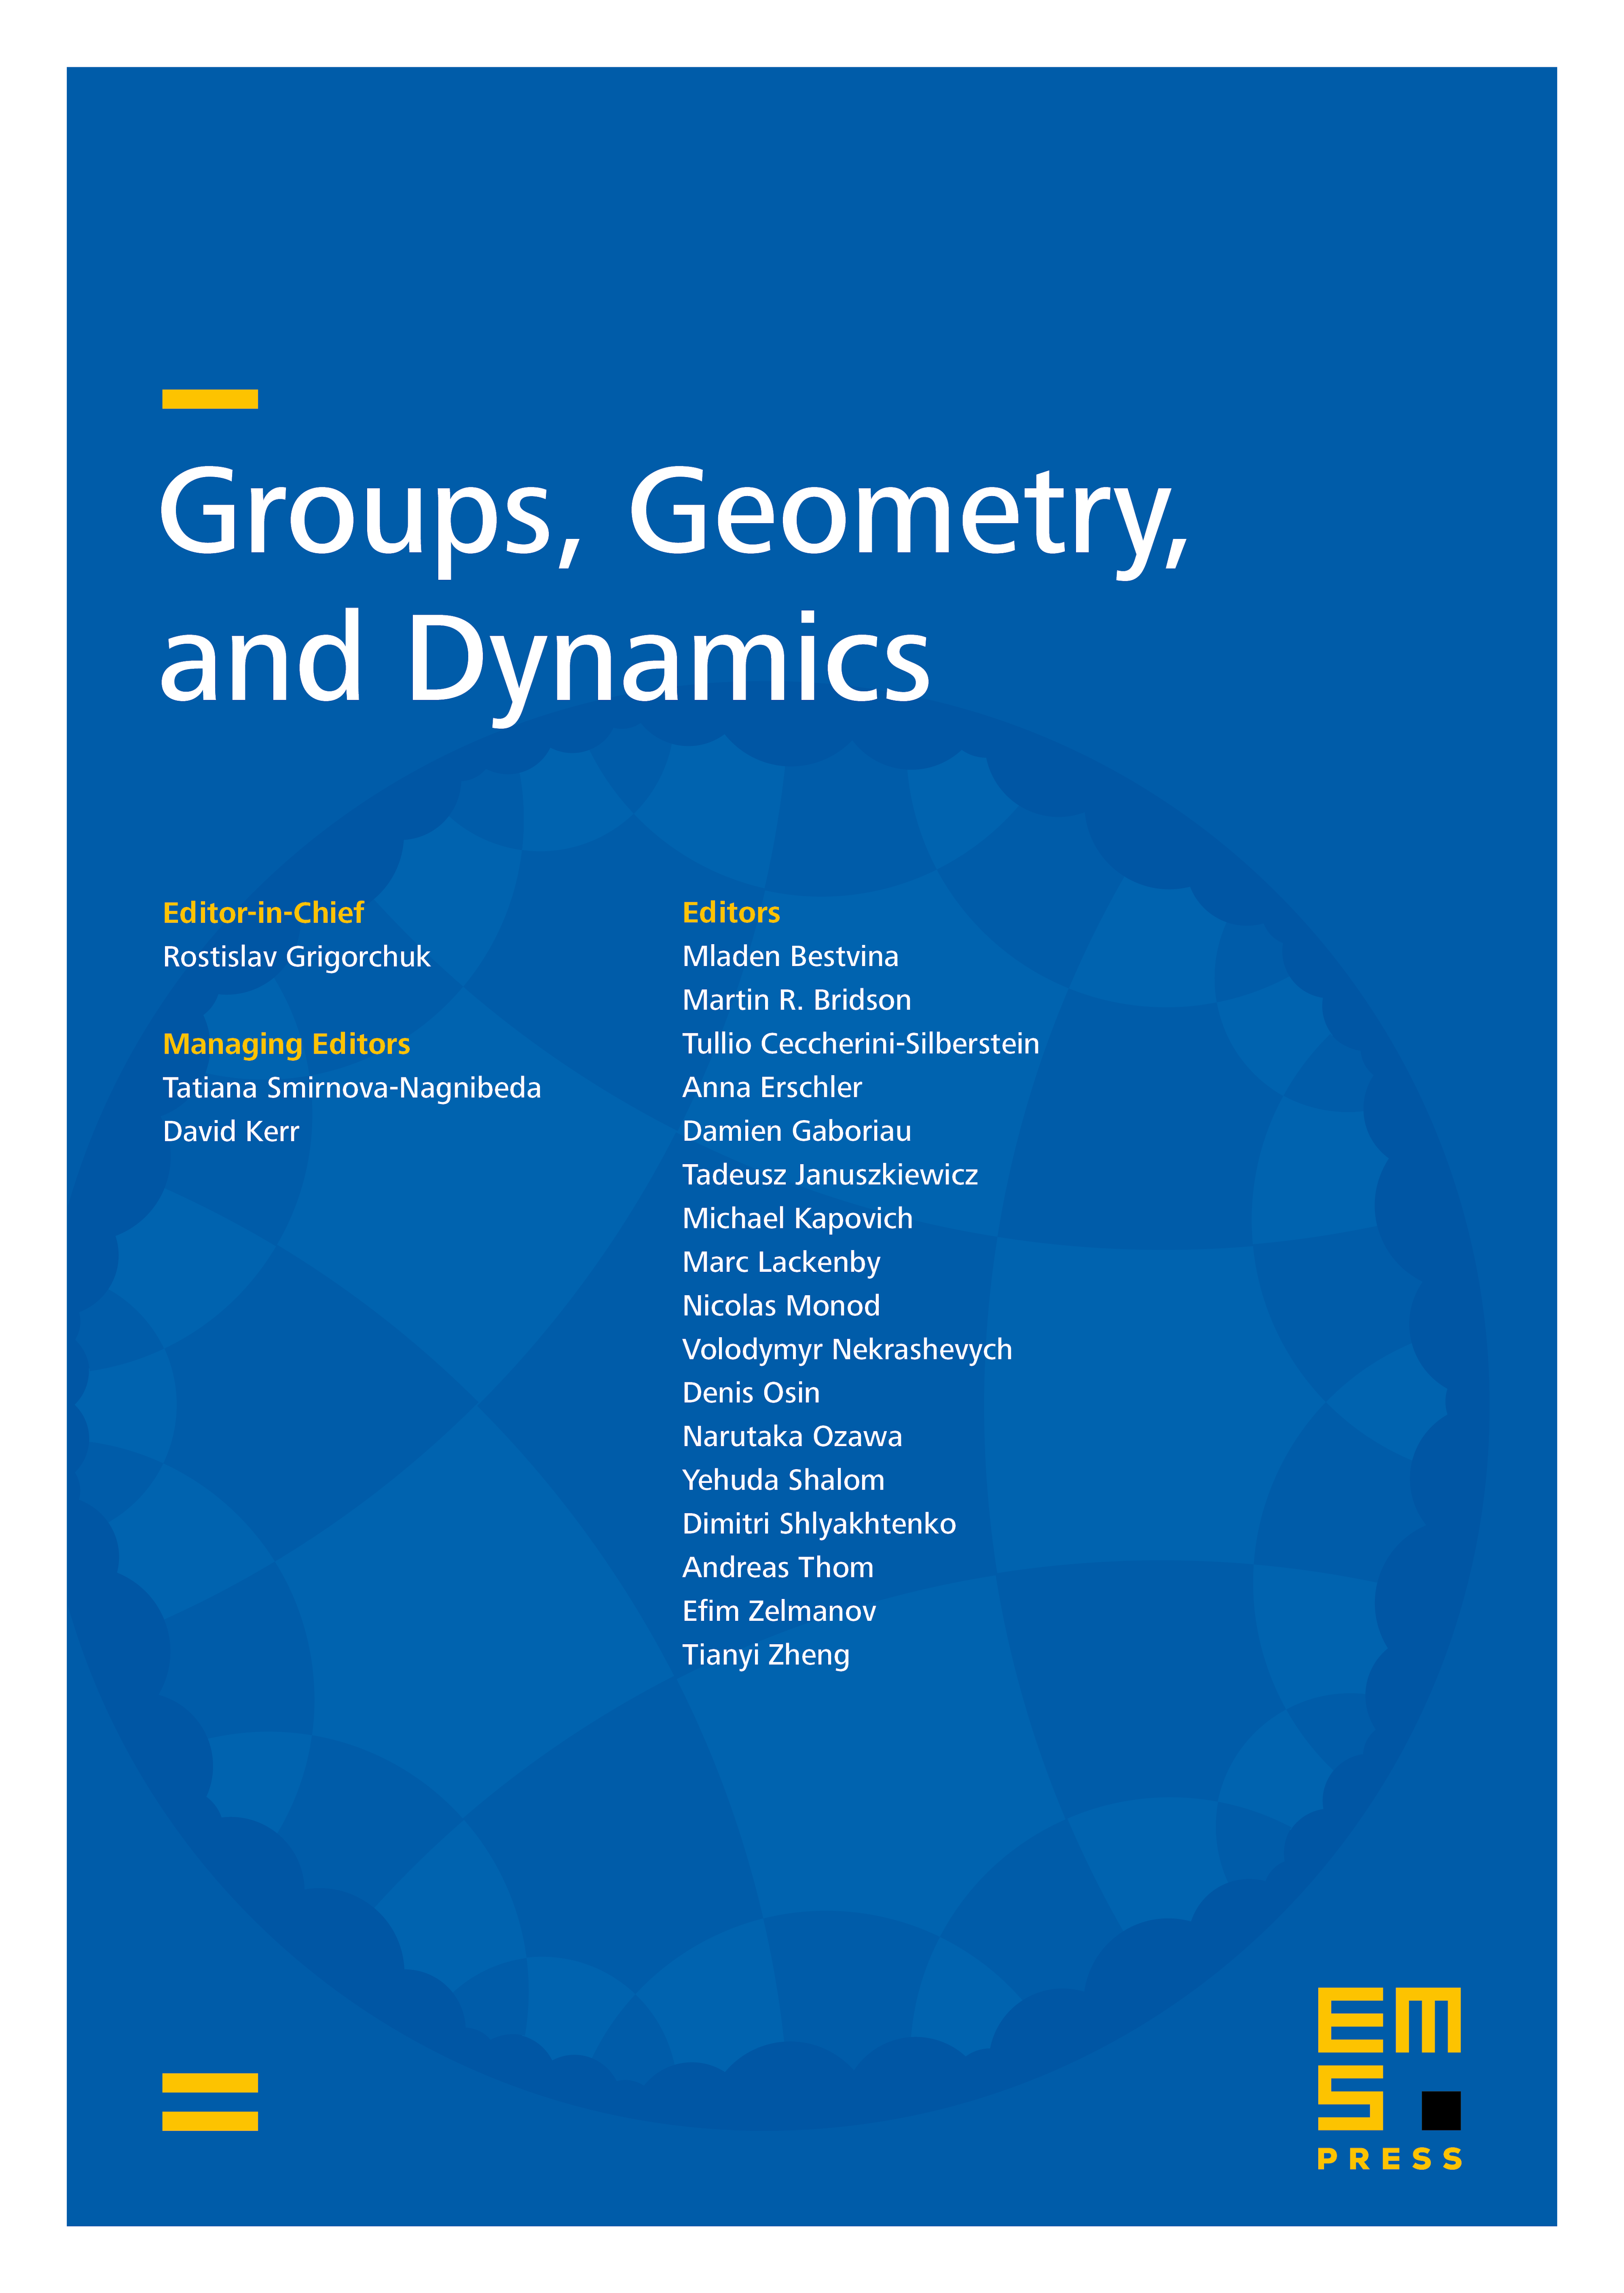 Abelian subgroups of the fundamental group of a space with no conjugate points cover